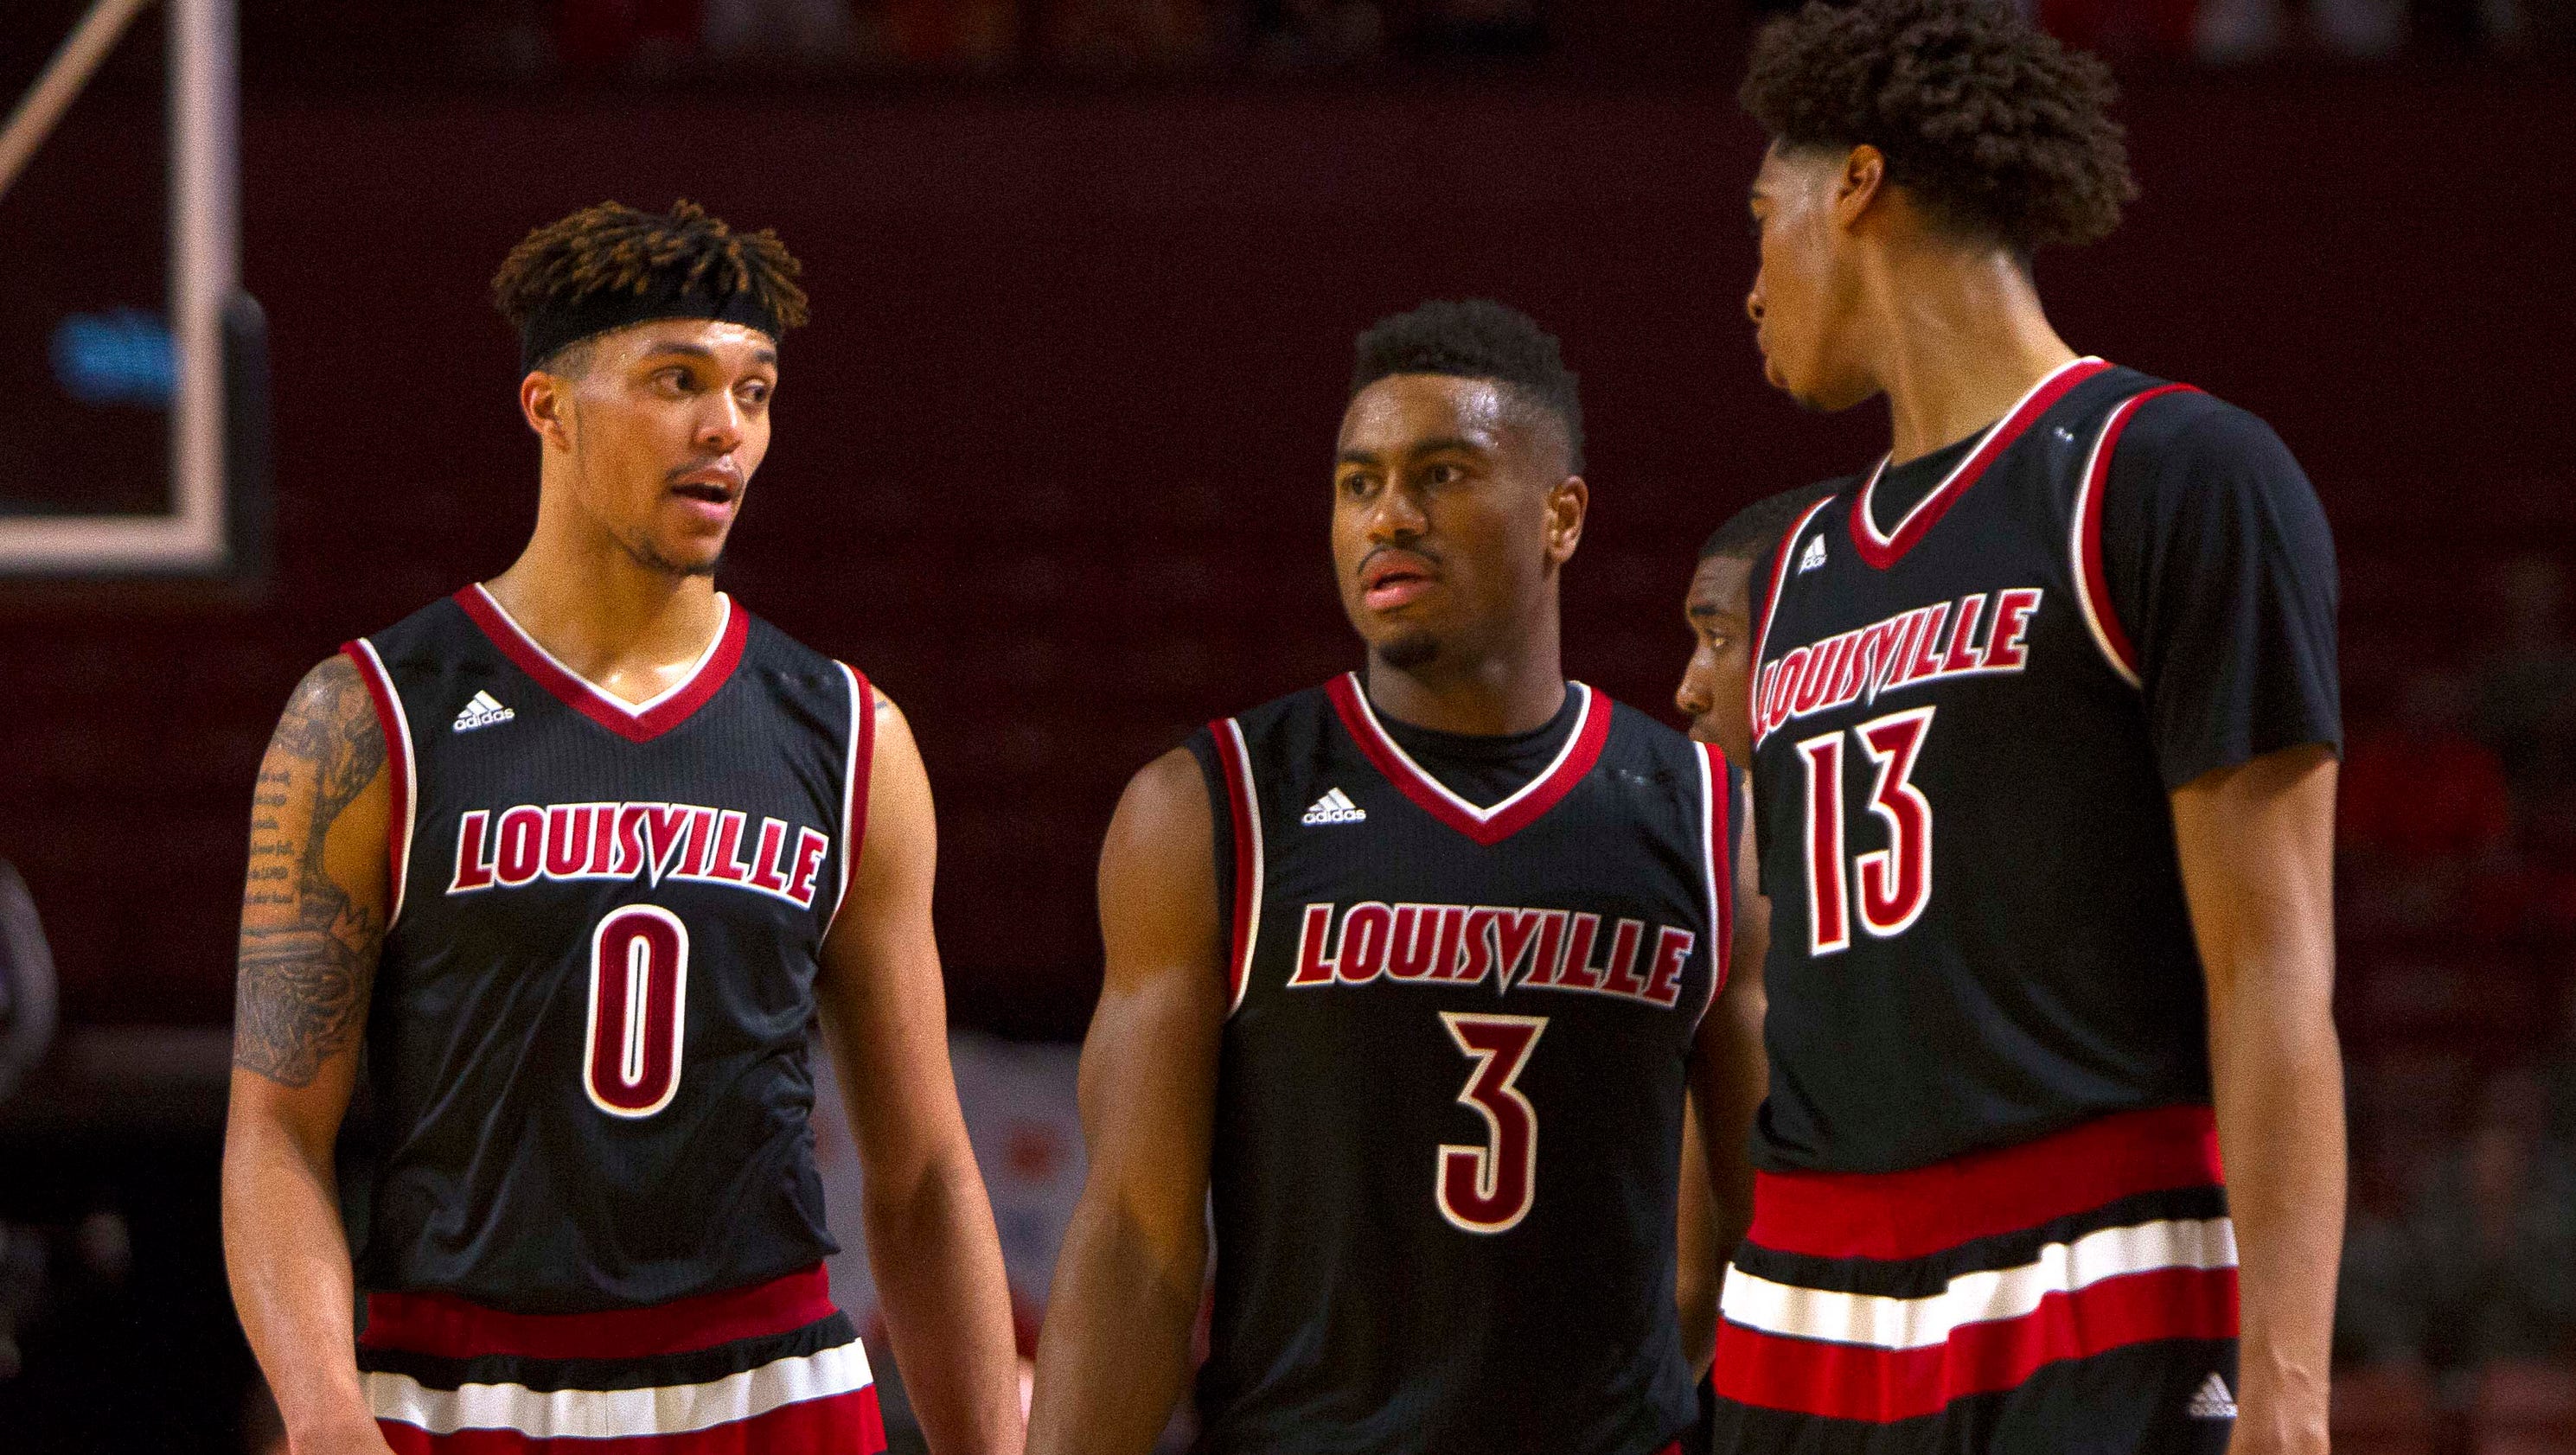 Louisville, in trying to minimize damage, makes players pay the price